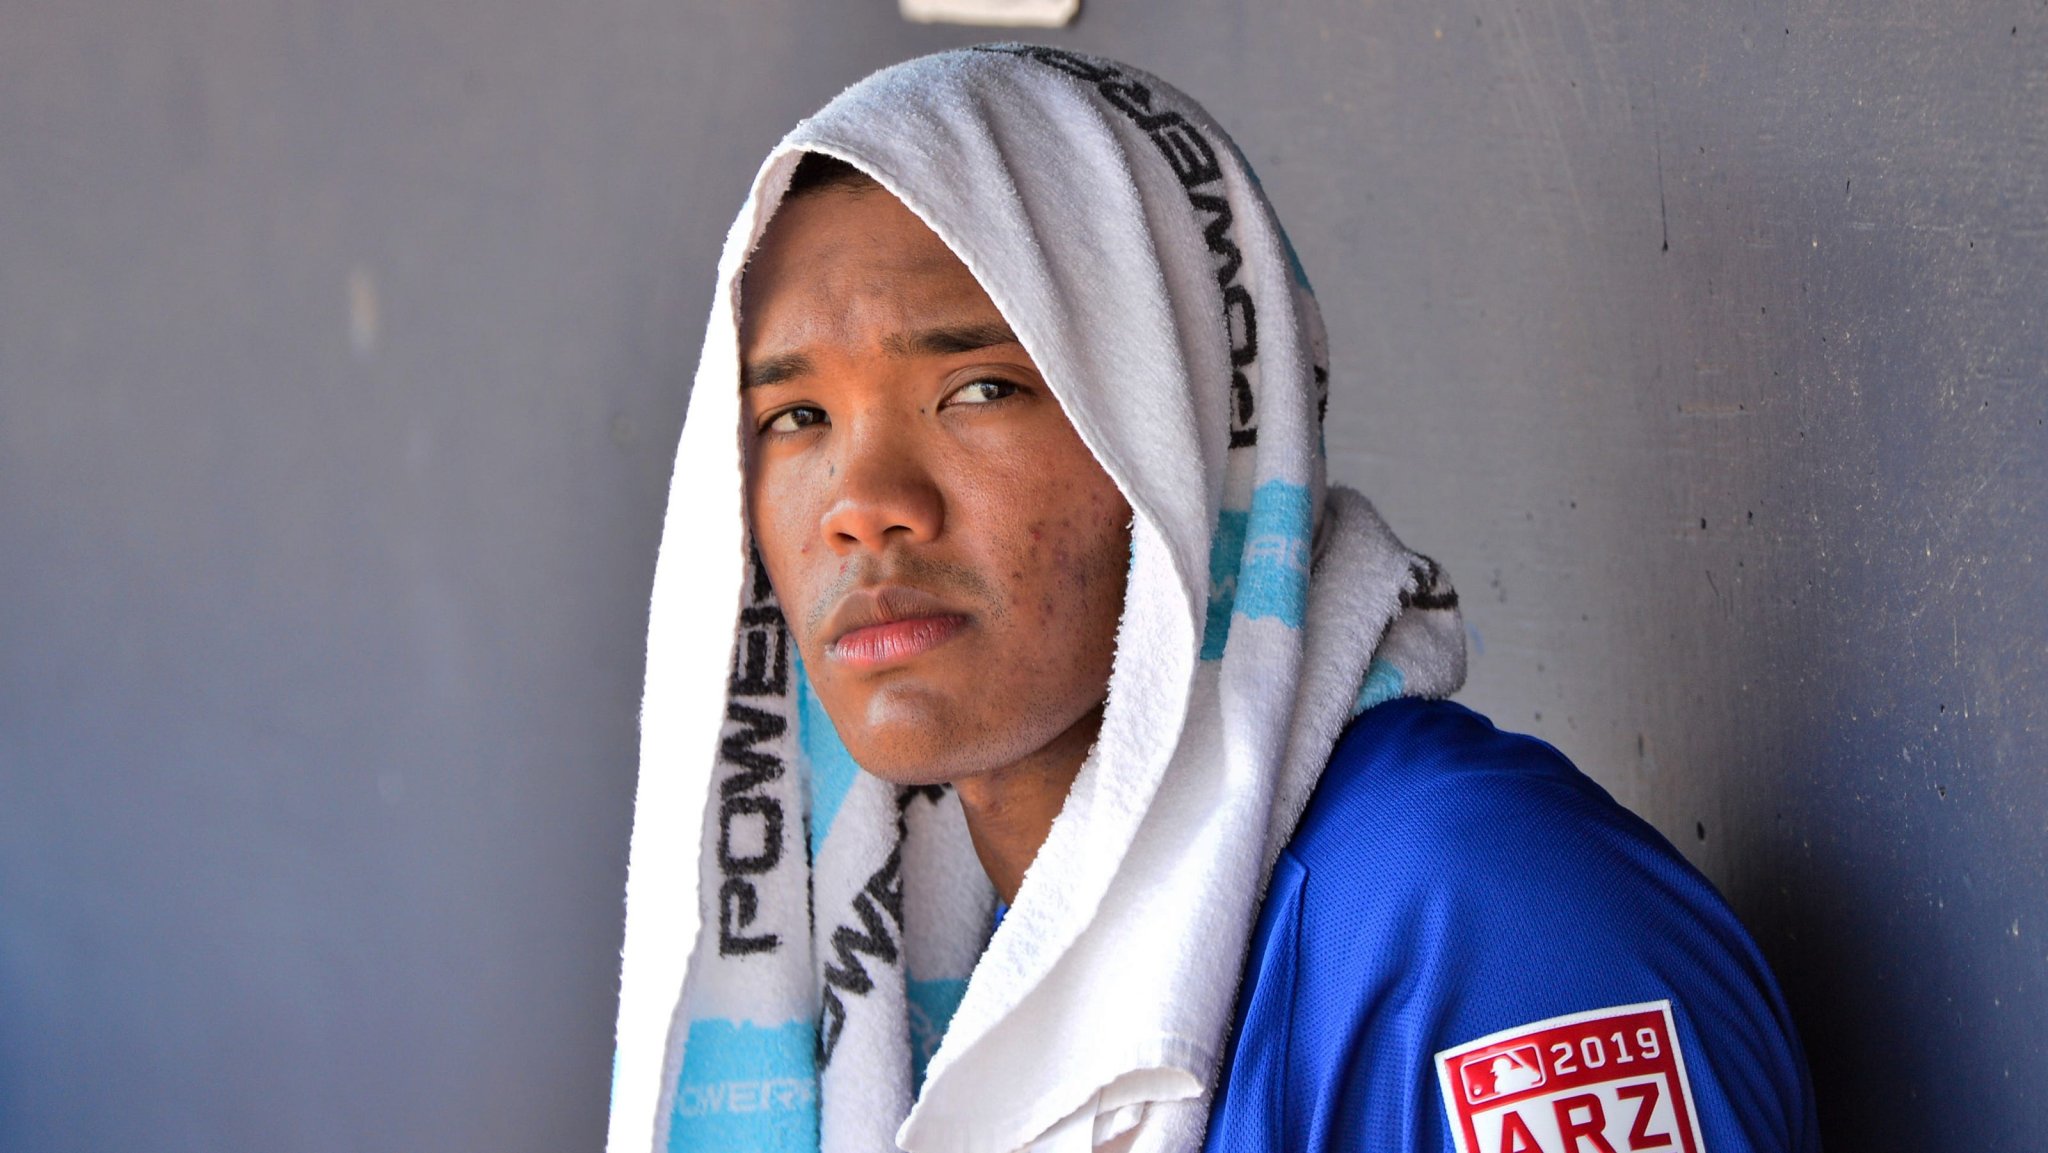 Chicago Cubs cut infielder Addison Russell, one year after domestic violence suspension